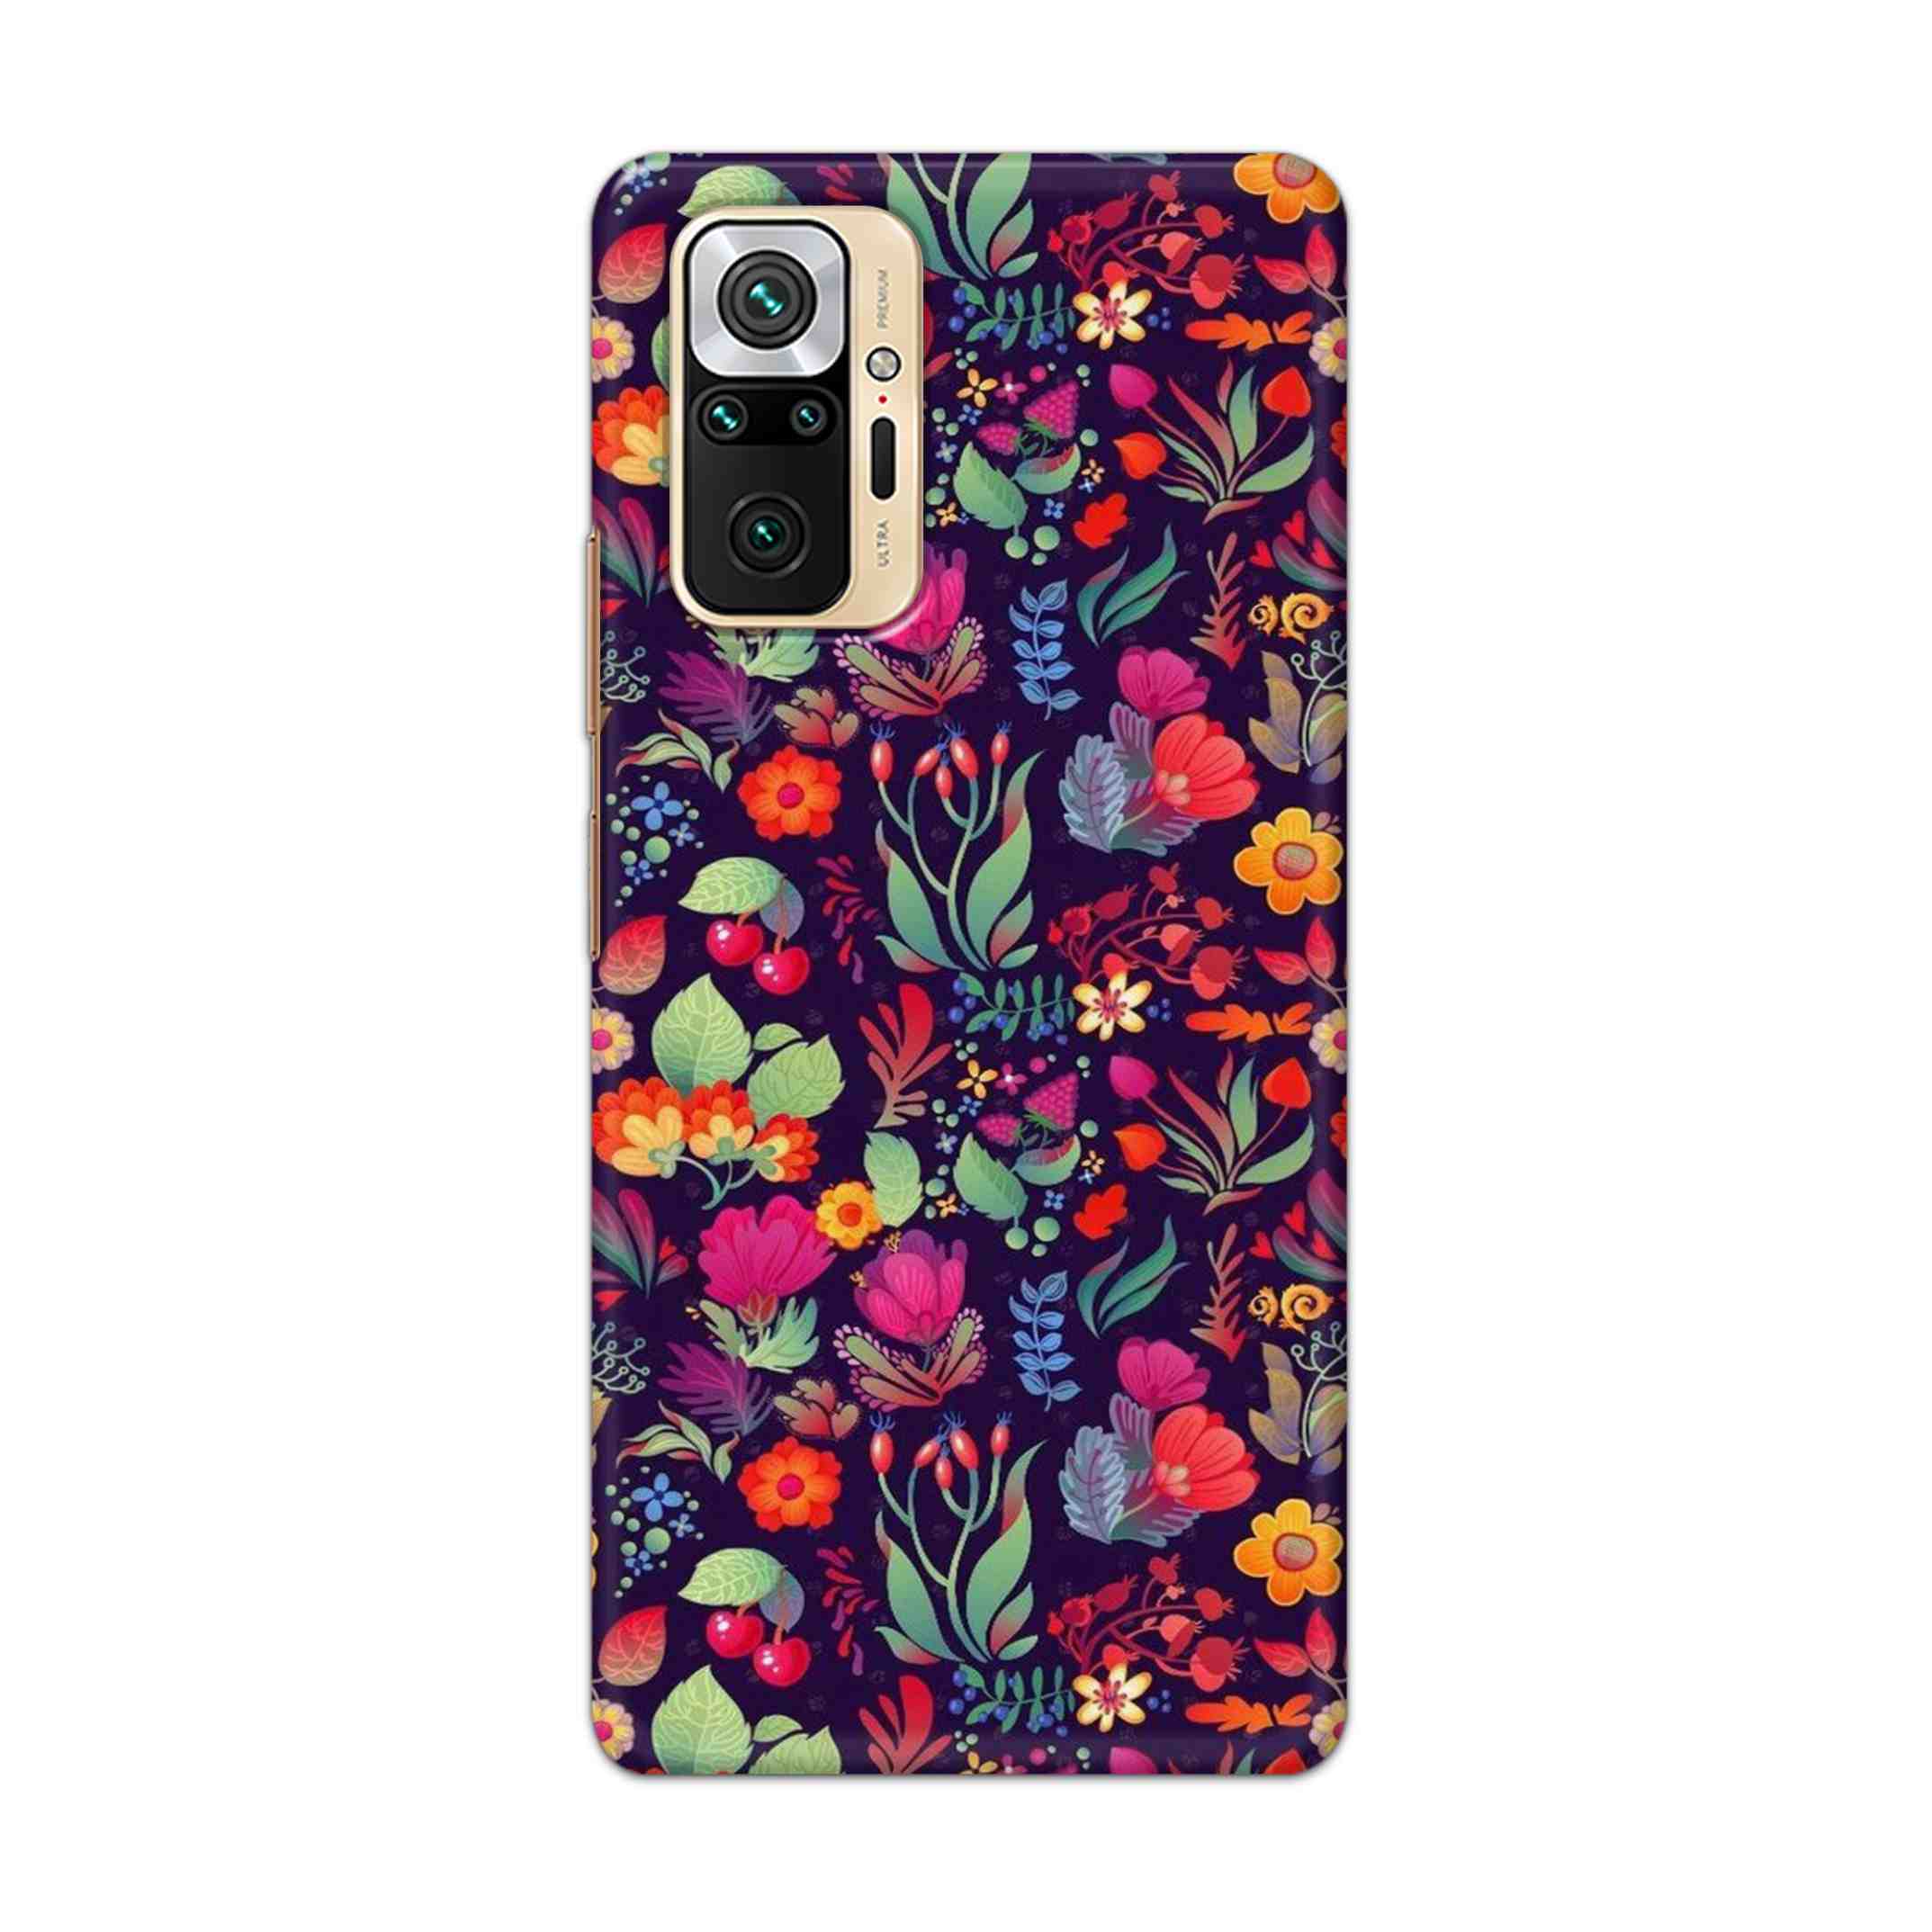 Buy Fruits Flower Hard Back Mobile Phone Case Cover For Redmi Note 10 Pro Online